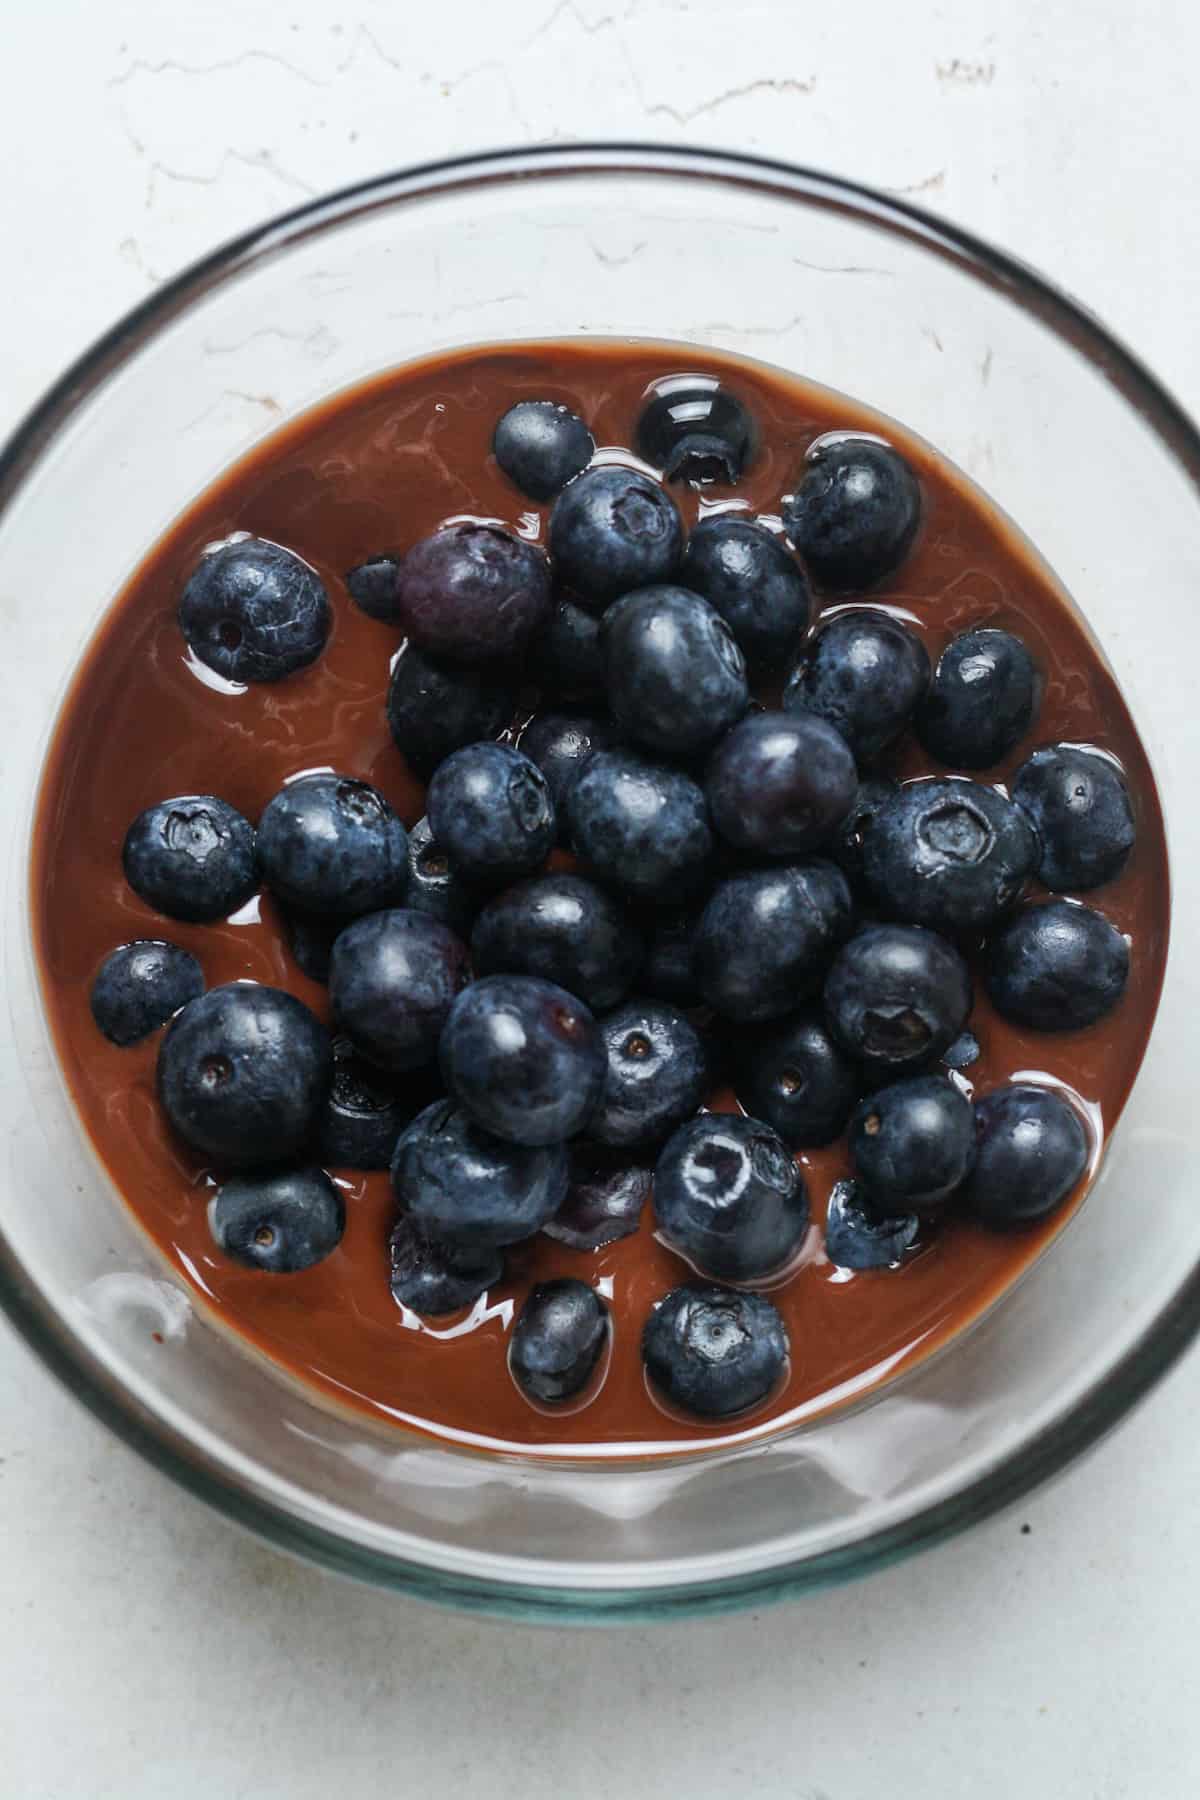 Chocolate with berries.